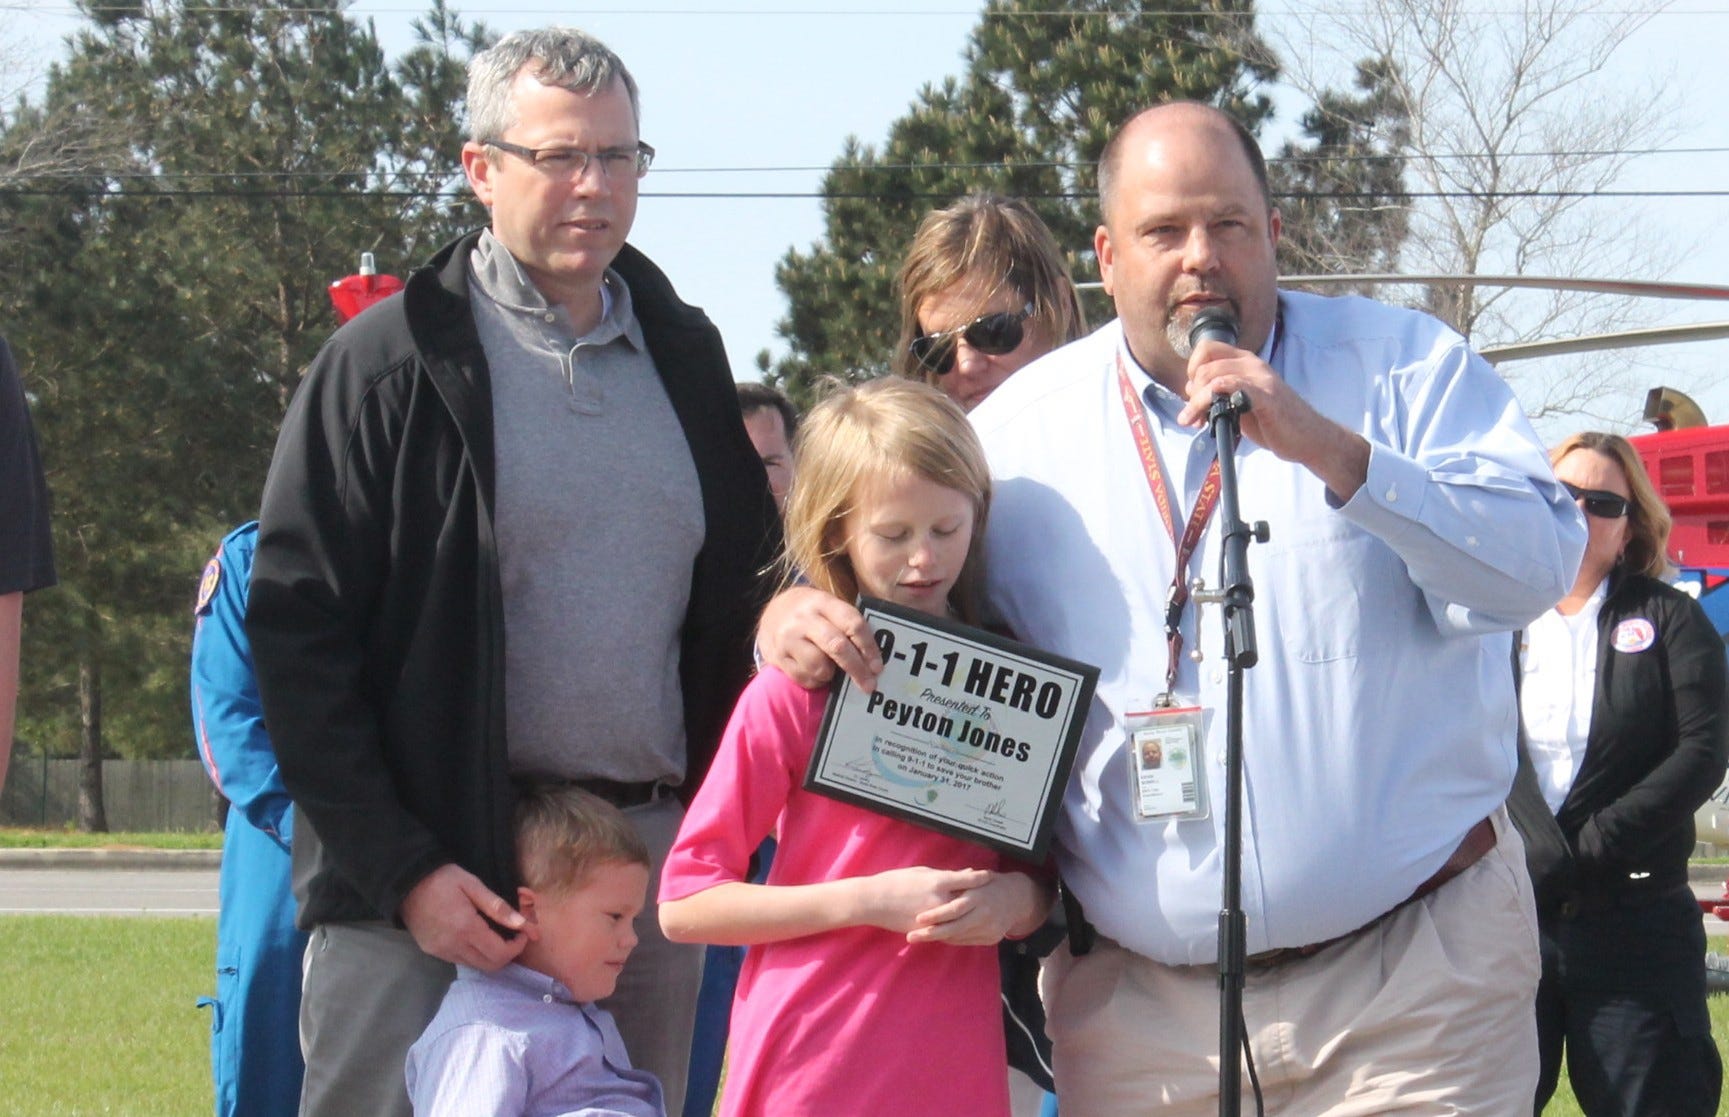 Pictured from left are Peyton Jones' father, Kevin Jones; her brother, Holton Jones; her mother, Genia Jones; Peyton; and Santa Rosa County Emergency Management's 9-1-1 coordinator, Kevin Sowell. Sowell presented the 9-1-1 Hero award to Peyton, who called 9-1-1 to save her brother Holton's life. [AARON LITTLE | Press Gazette]